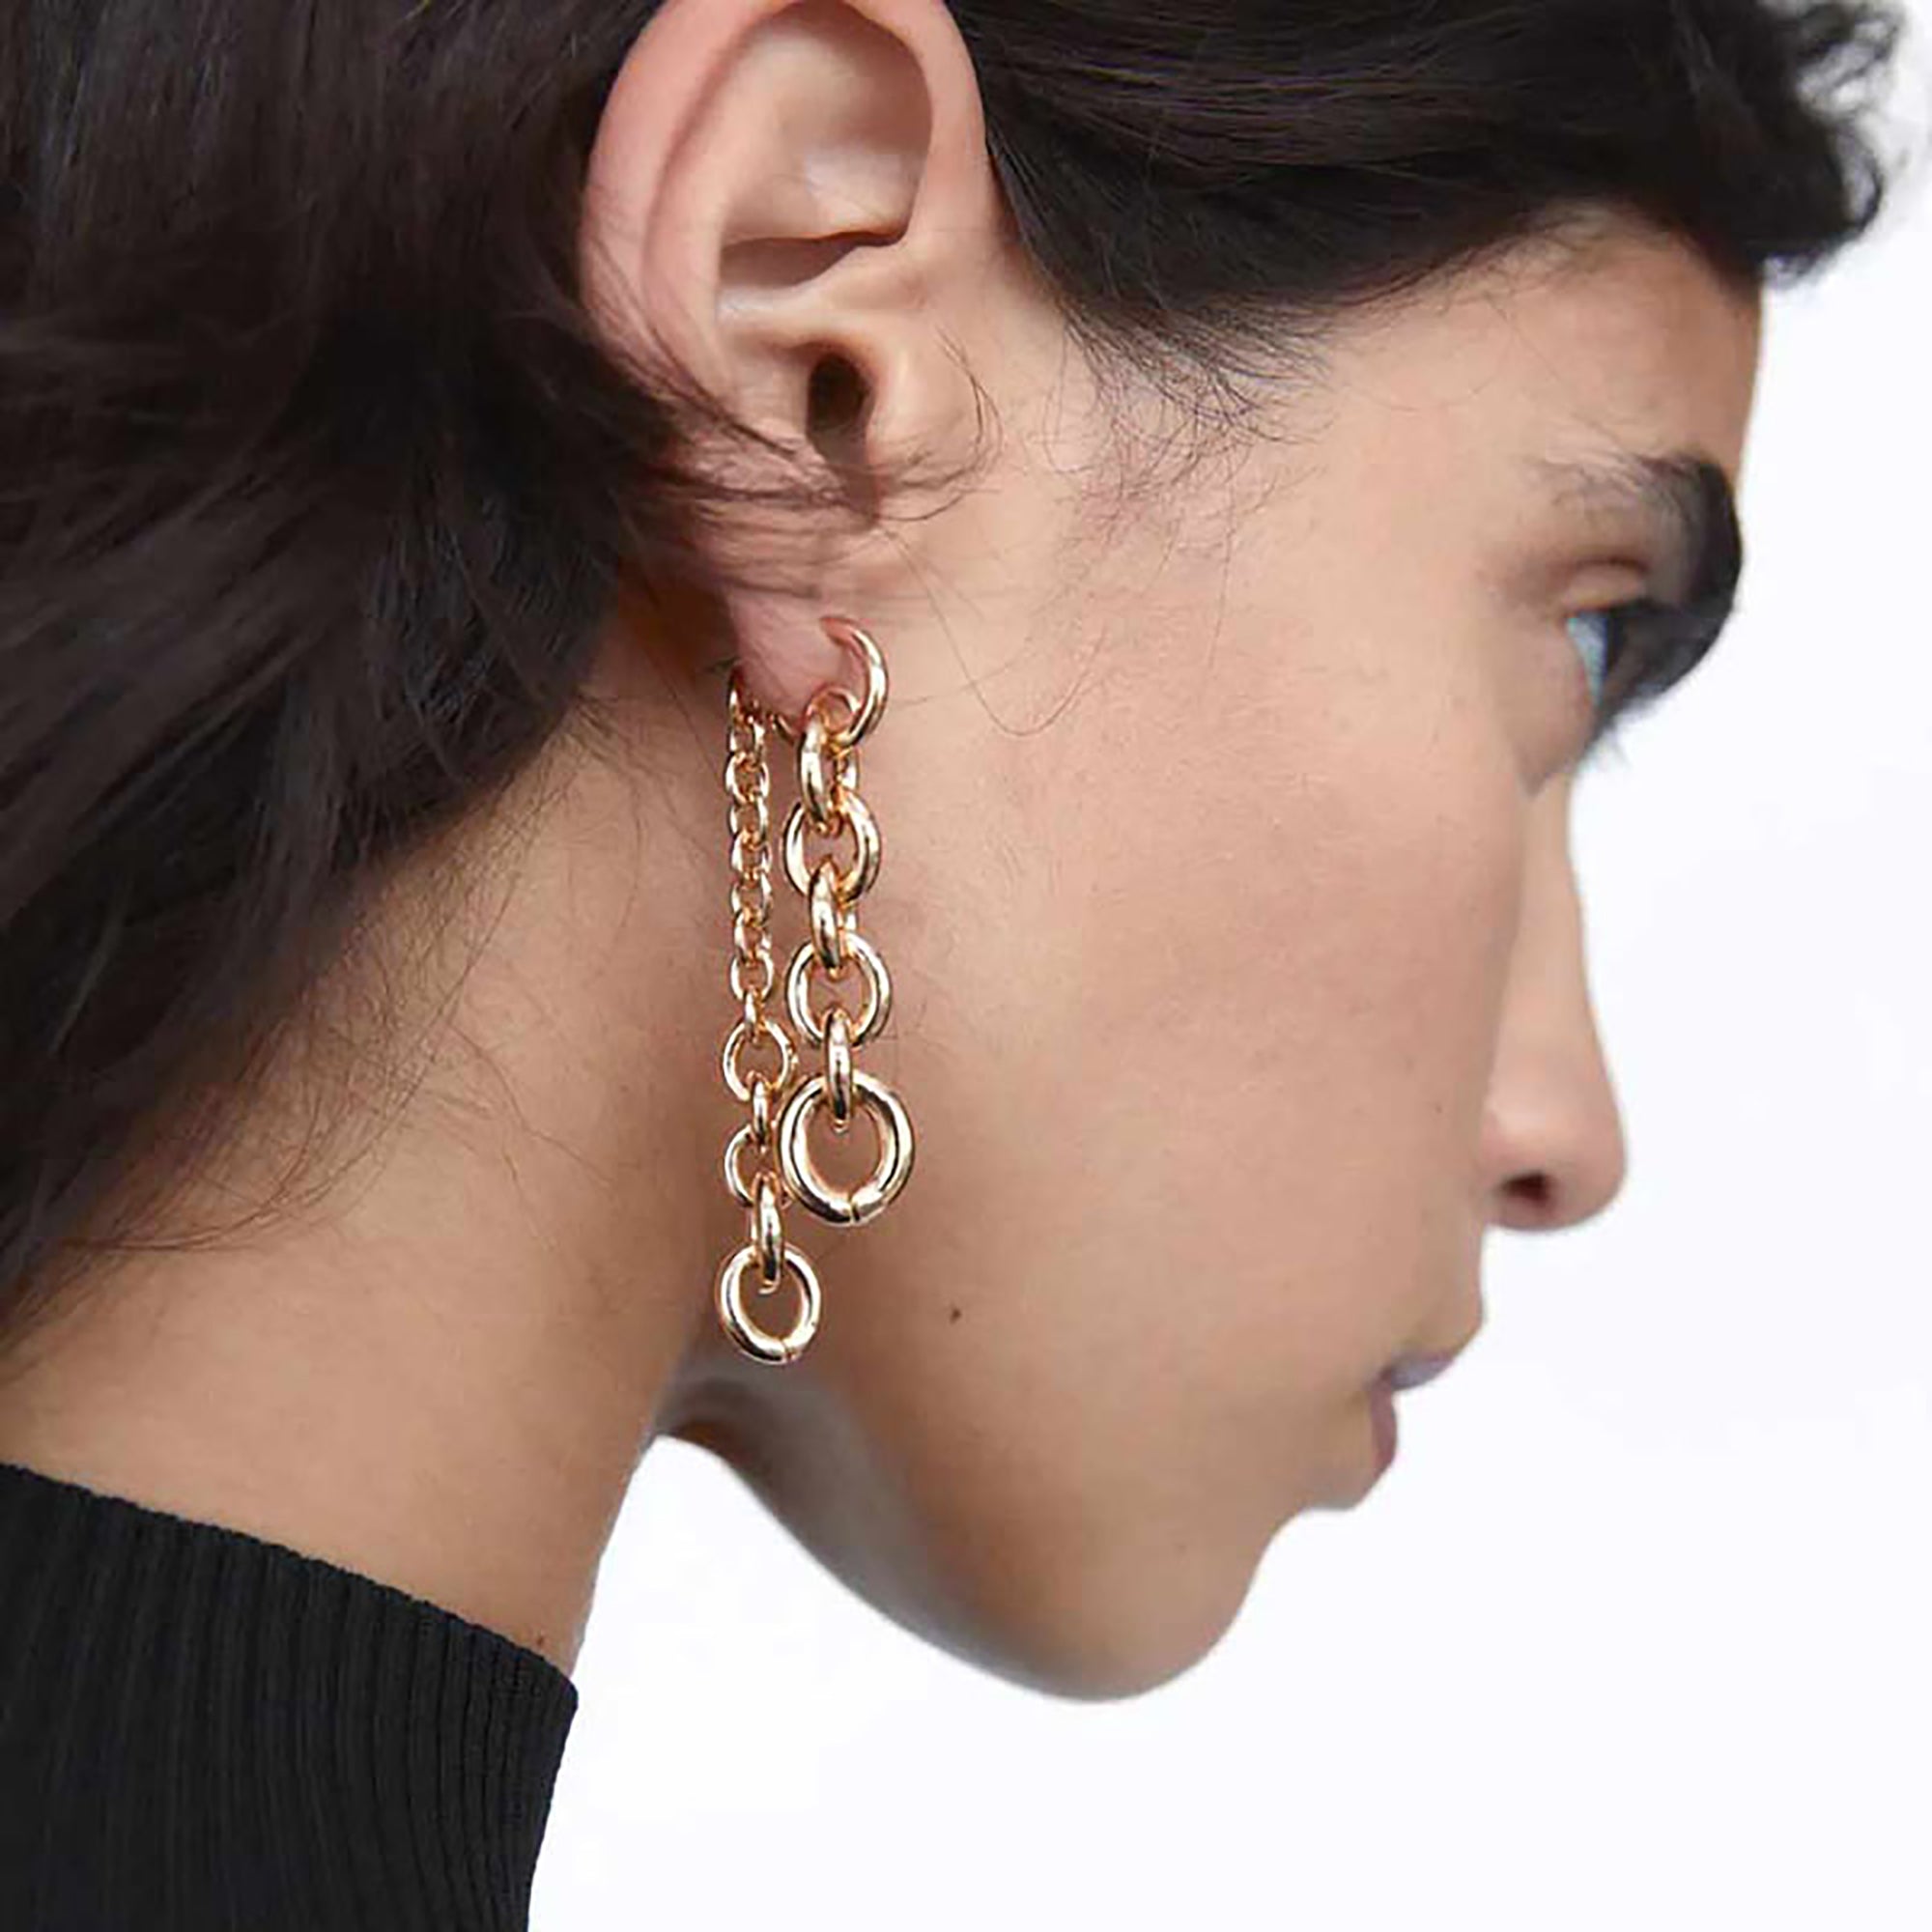 Gold Plated Chunky Metal Chain Double Side Earrings Gift wedding influencer styling KOL / Youtuber / Celebrity / Fashion Icon picked